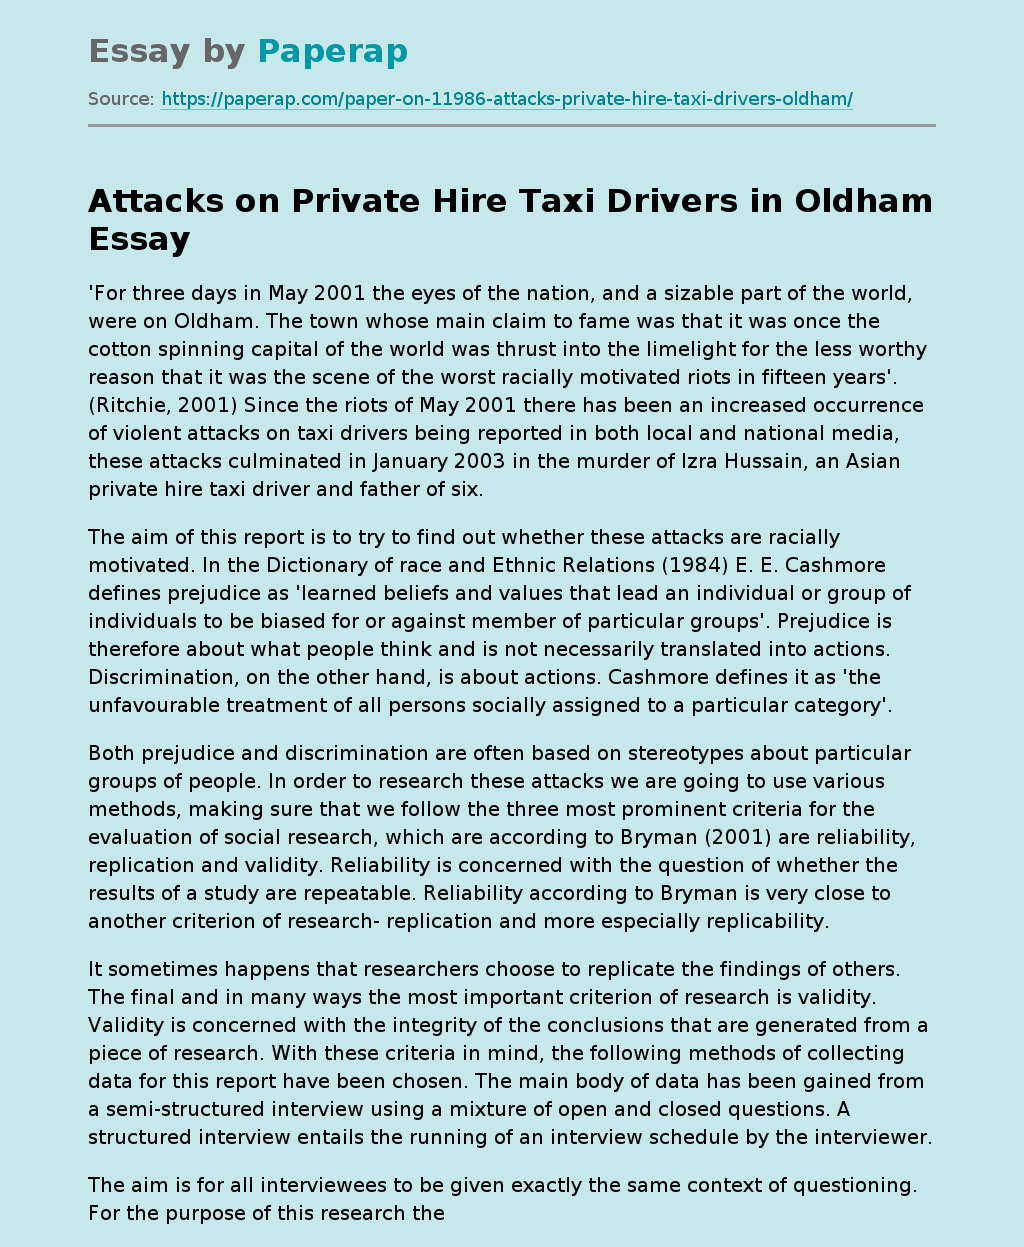 Attacks on Private Hire Taxi Drivers in Oldham